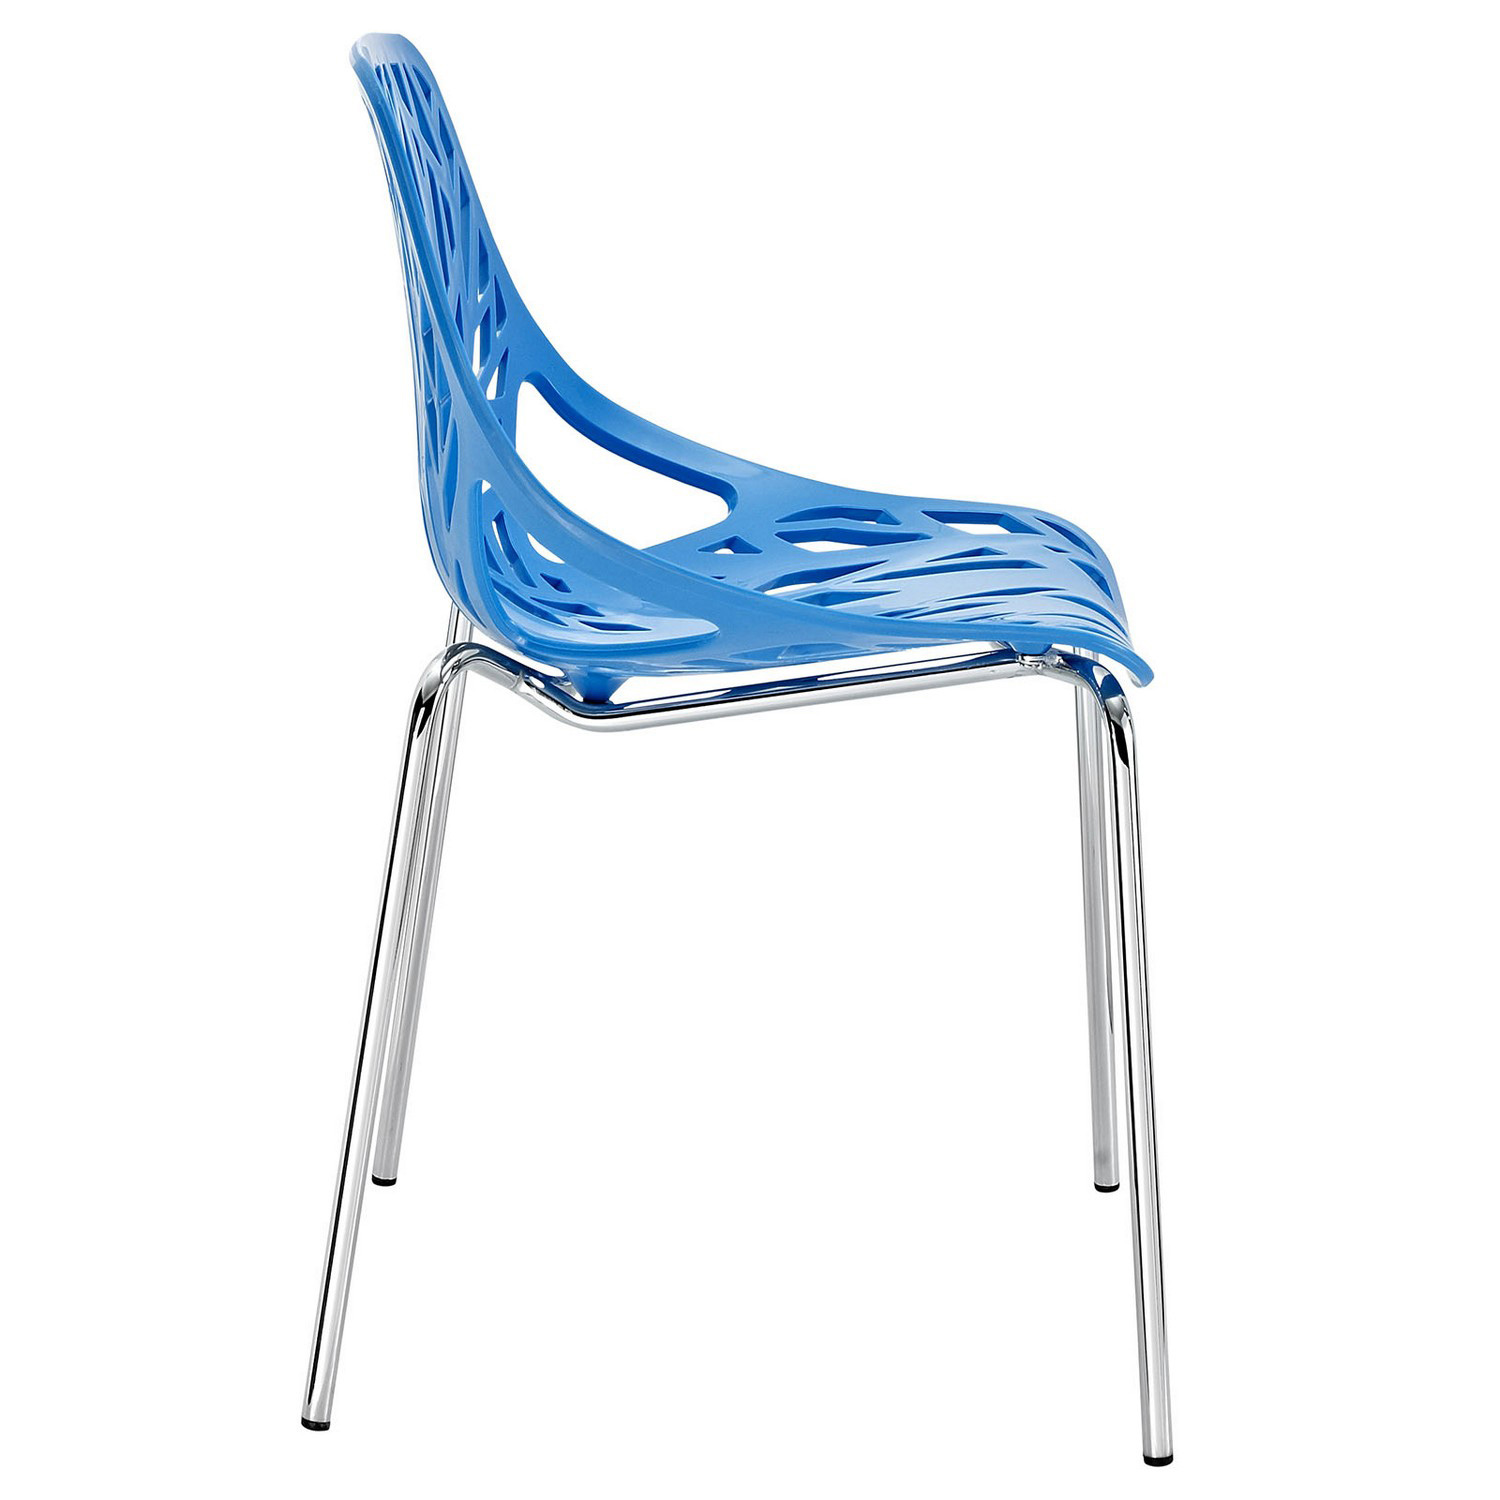 Modway Stencil Dining Side Chair - Blue